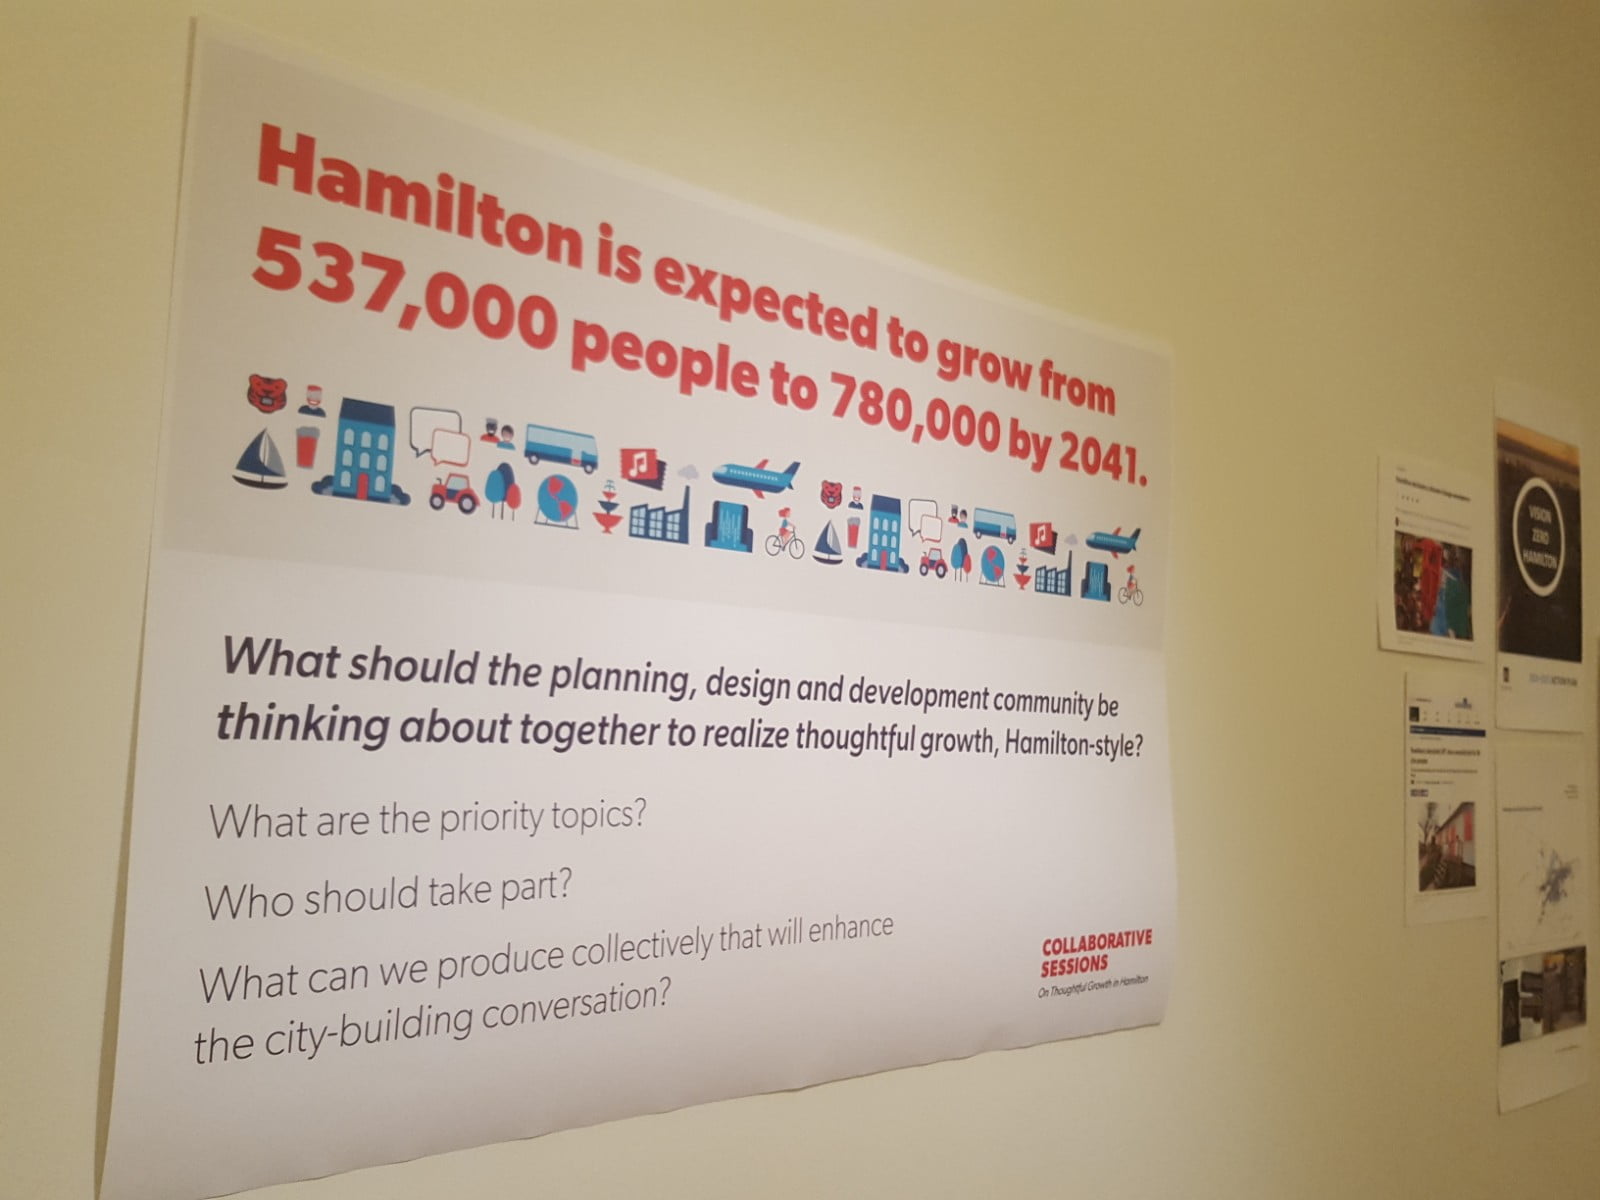 Photo of poster that reads: "Hamilton is expected to grow from 537,000 people to 780,00 by 2041."